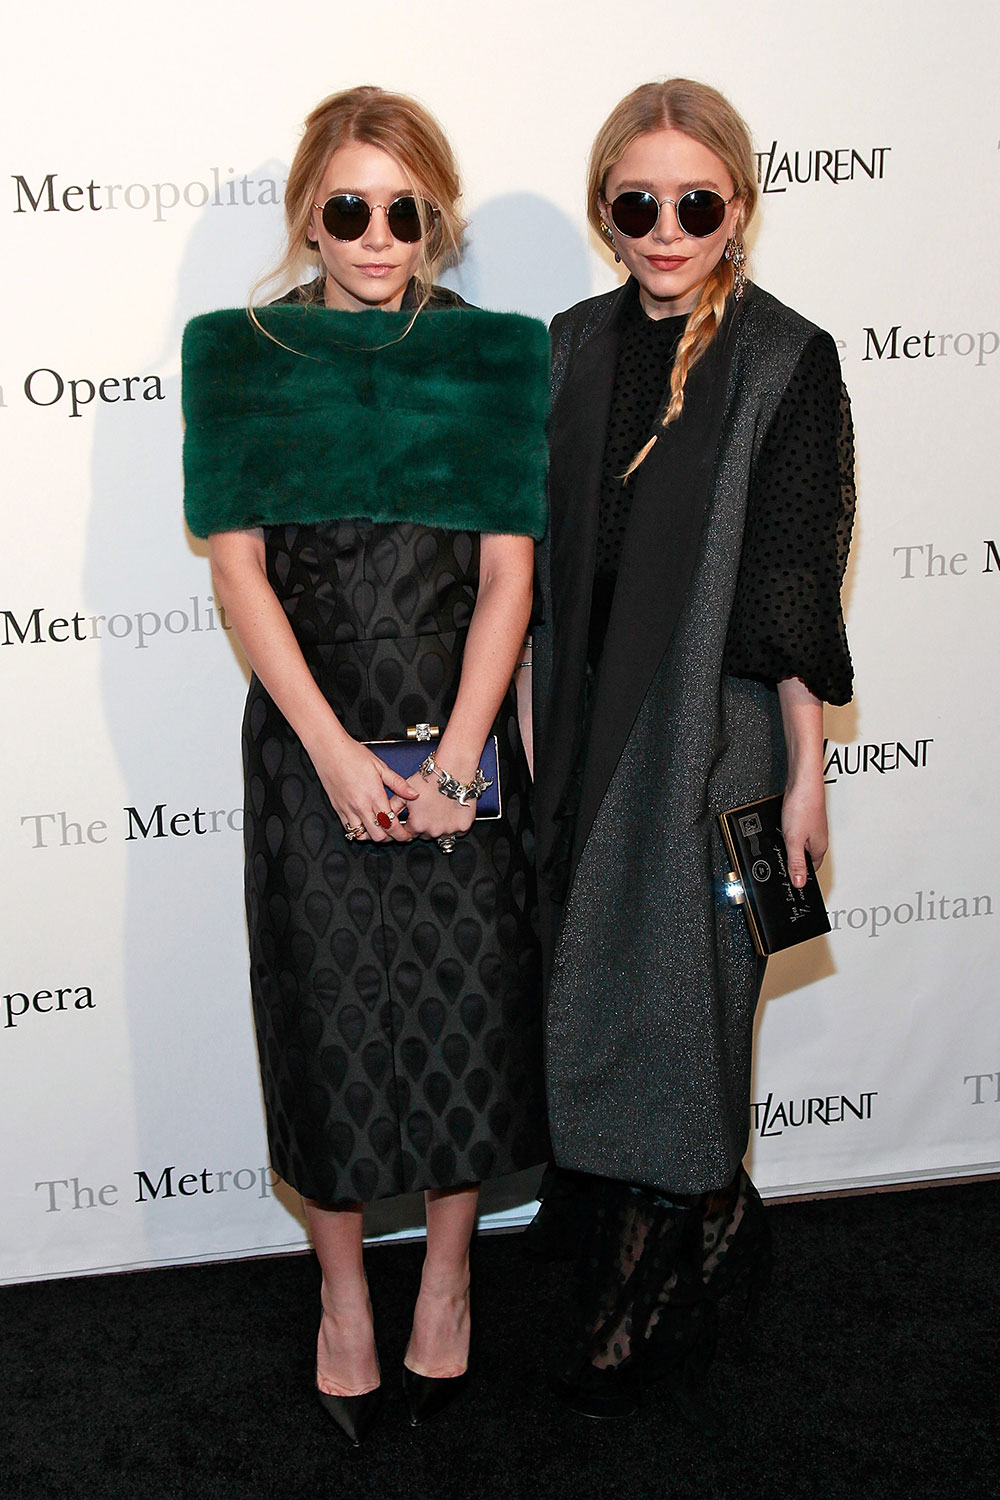 Mary-Kate and Ashley Olsen at the Metropolitan Opera's gala premiere of Rossini's 'Le Comte Ory' in 2011